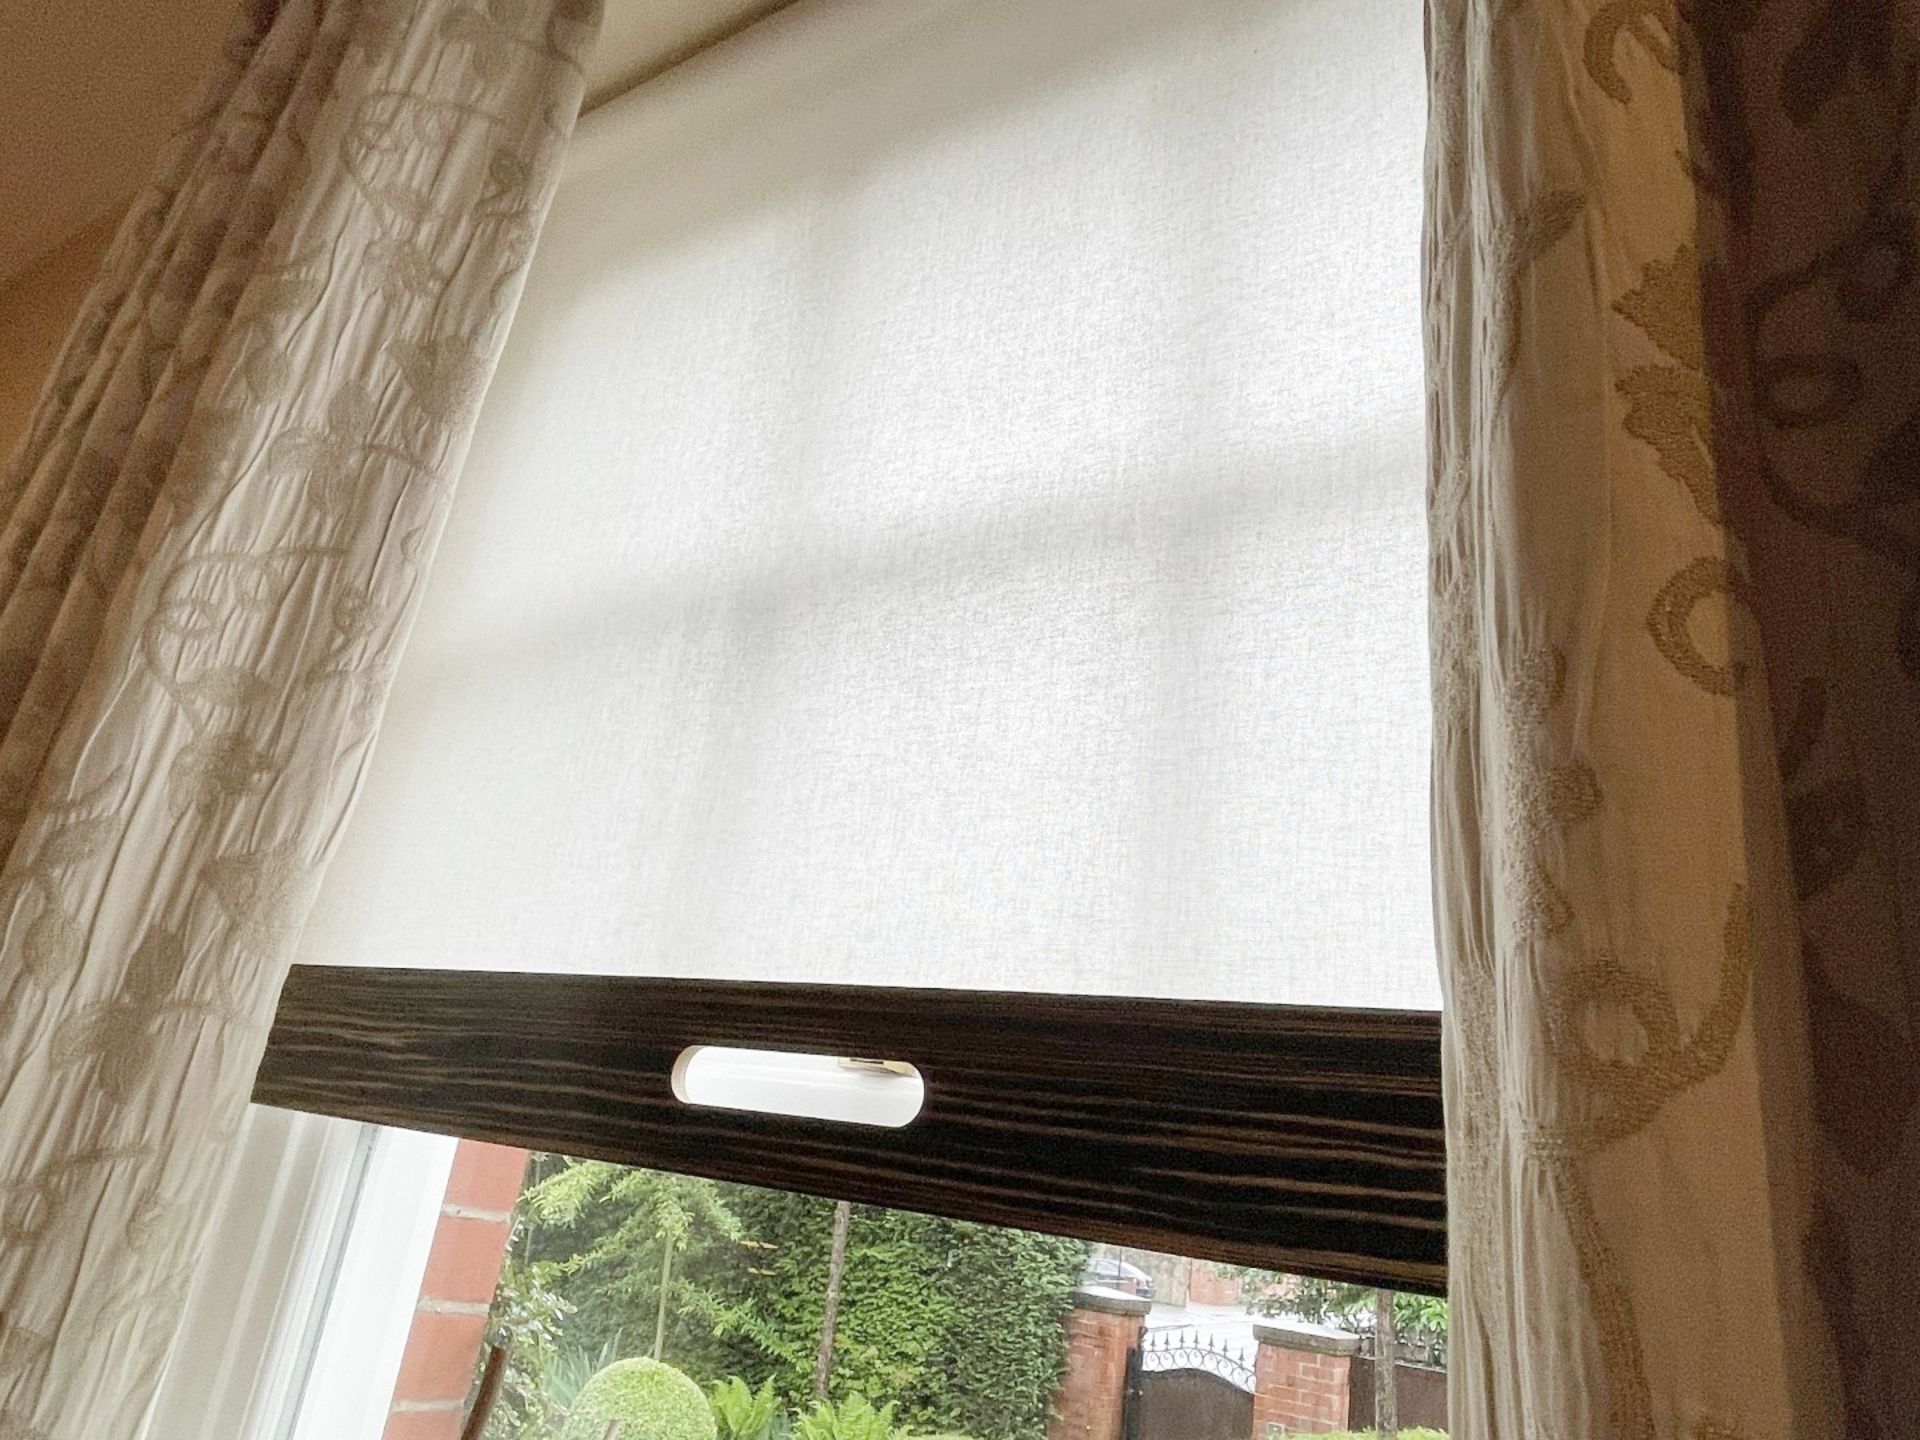 1 x Heavily Lined Premium Embosed Pair Of Curtains - Includes Poles And Blind - Ref: SGV126/GF-Ent - - Image 5 of 12